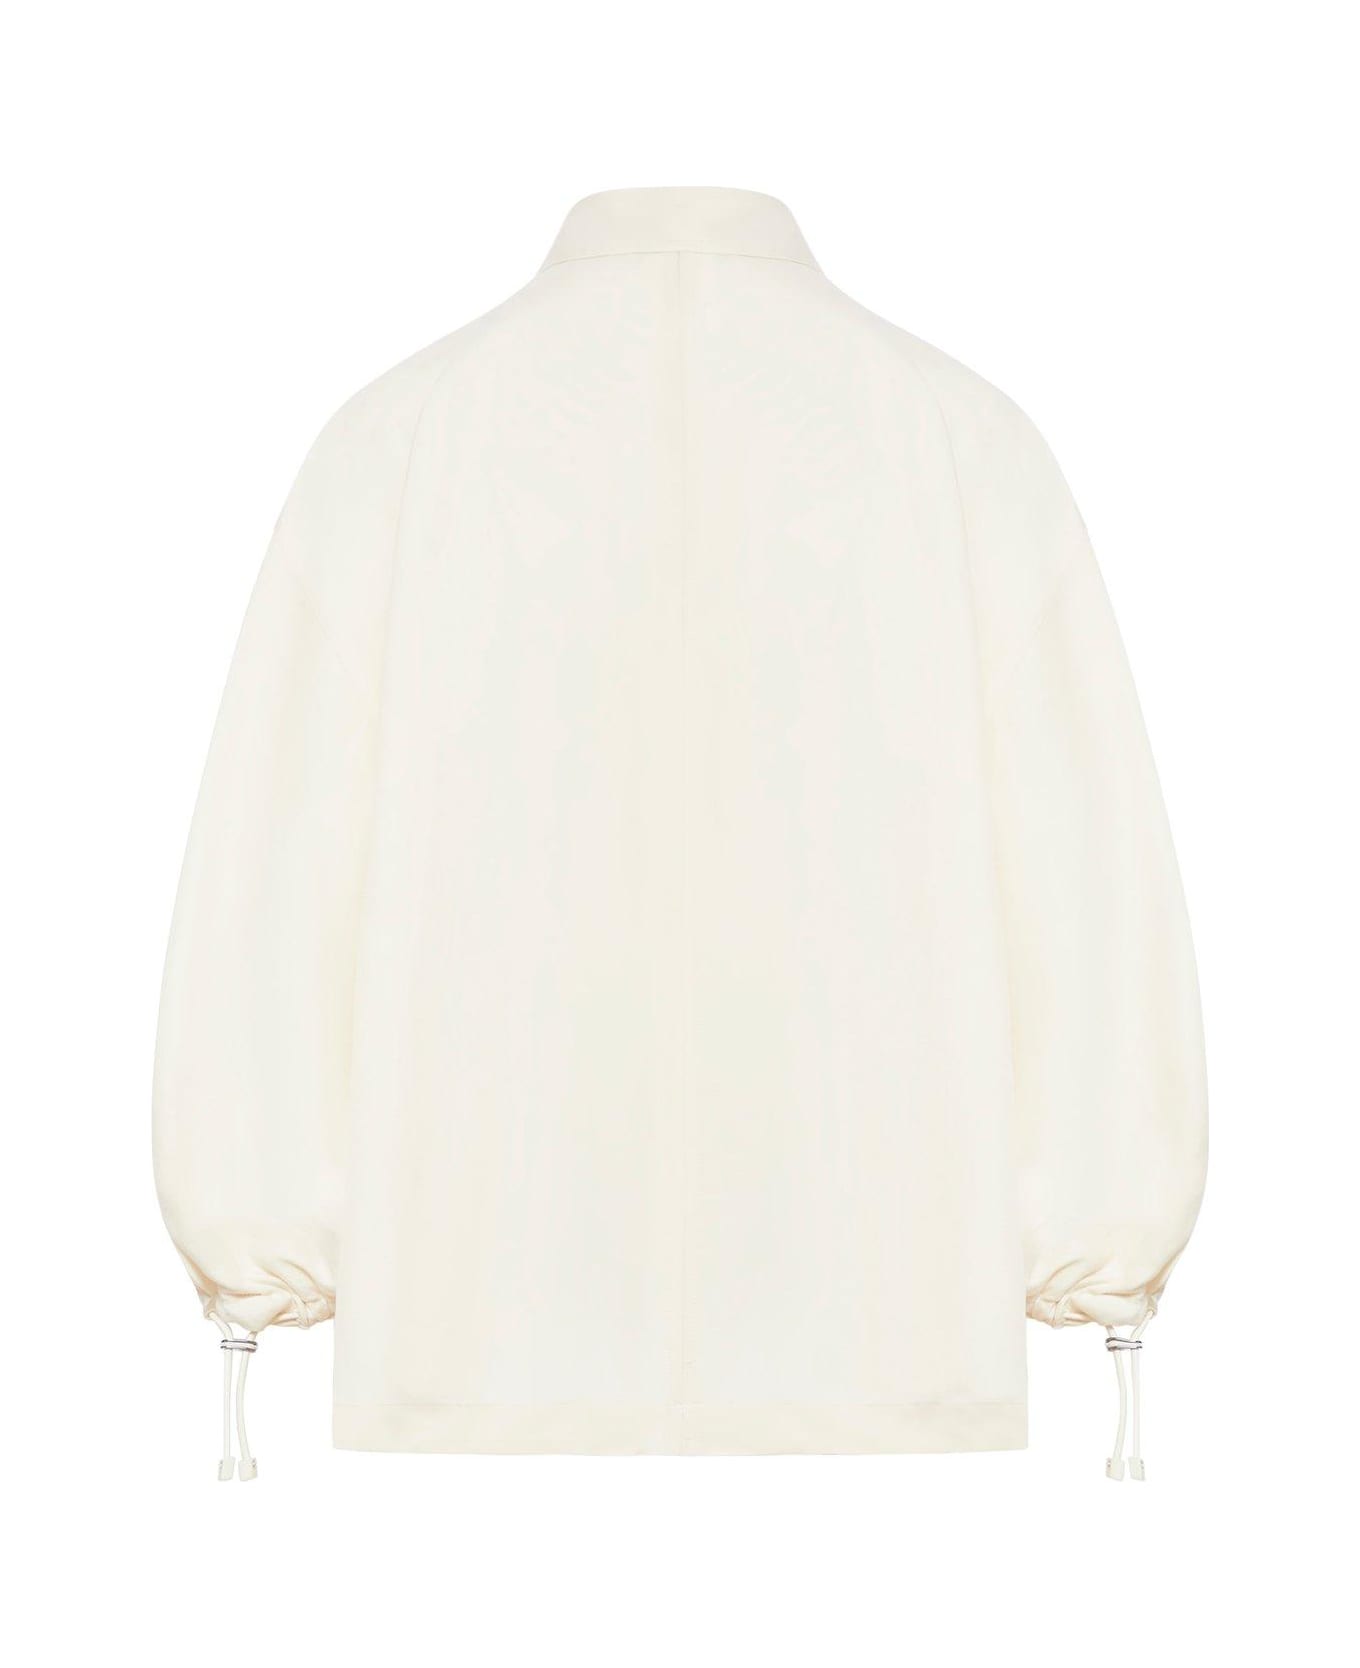 Max Mara Buttoned Long-sleeved Top - White Ivory シャツ